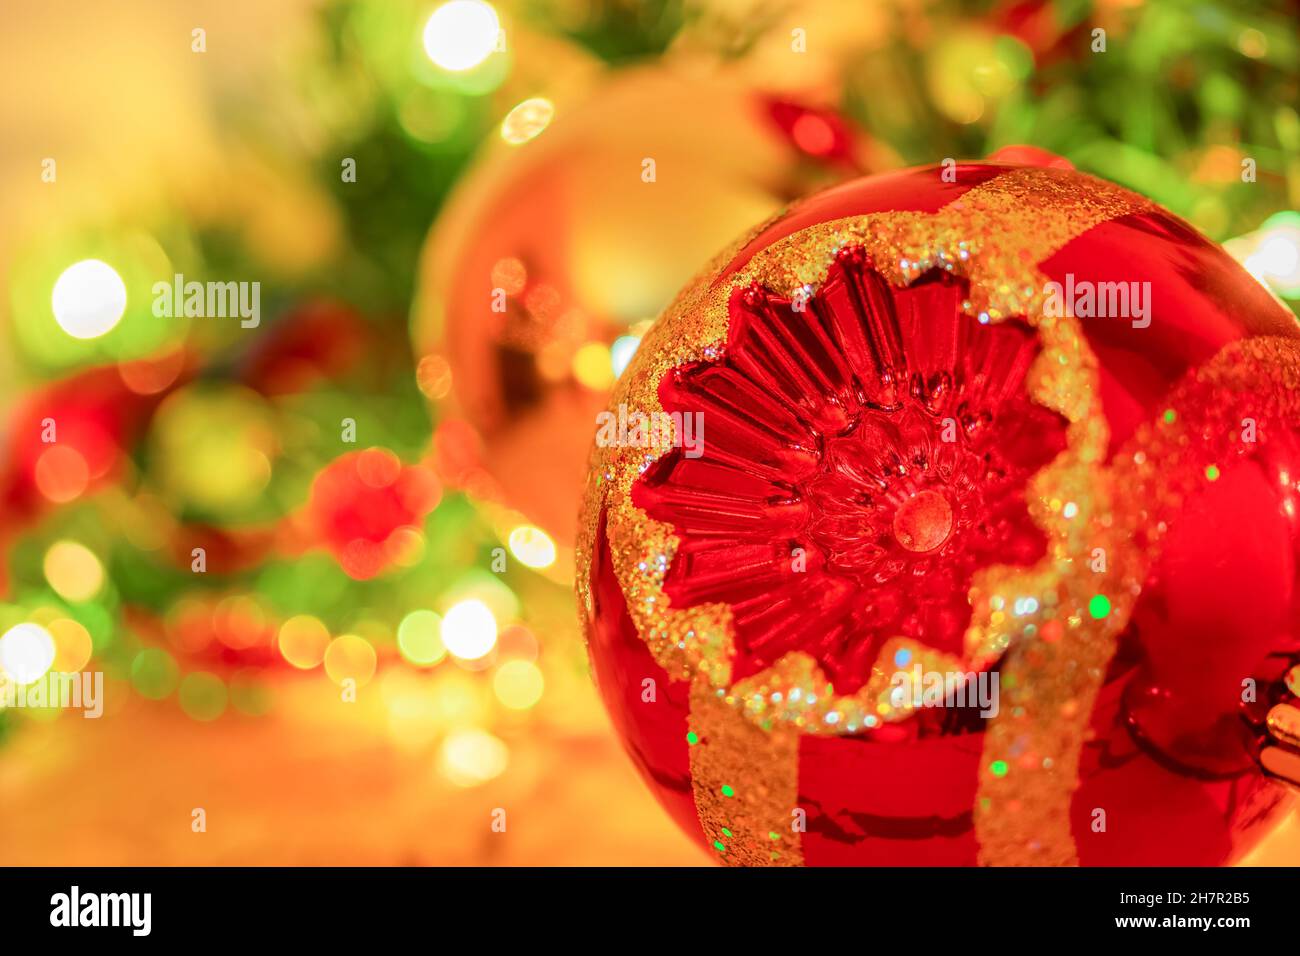 Christmas ornament in red and gold color is  surrounded by soft focus ornaments in bright glittering  colors on a fireplace mantel. Stock Photo